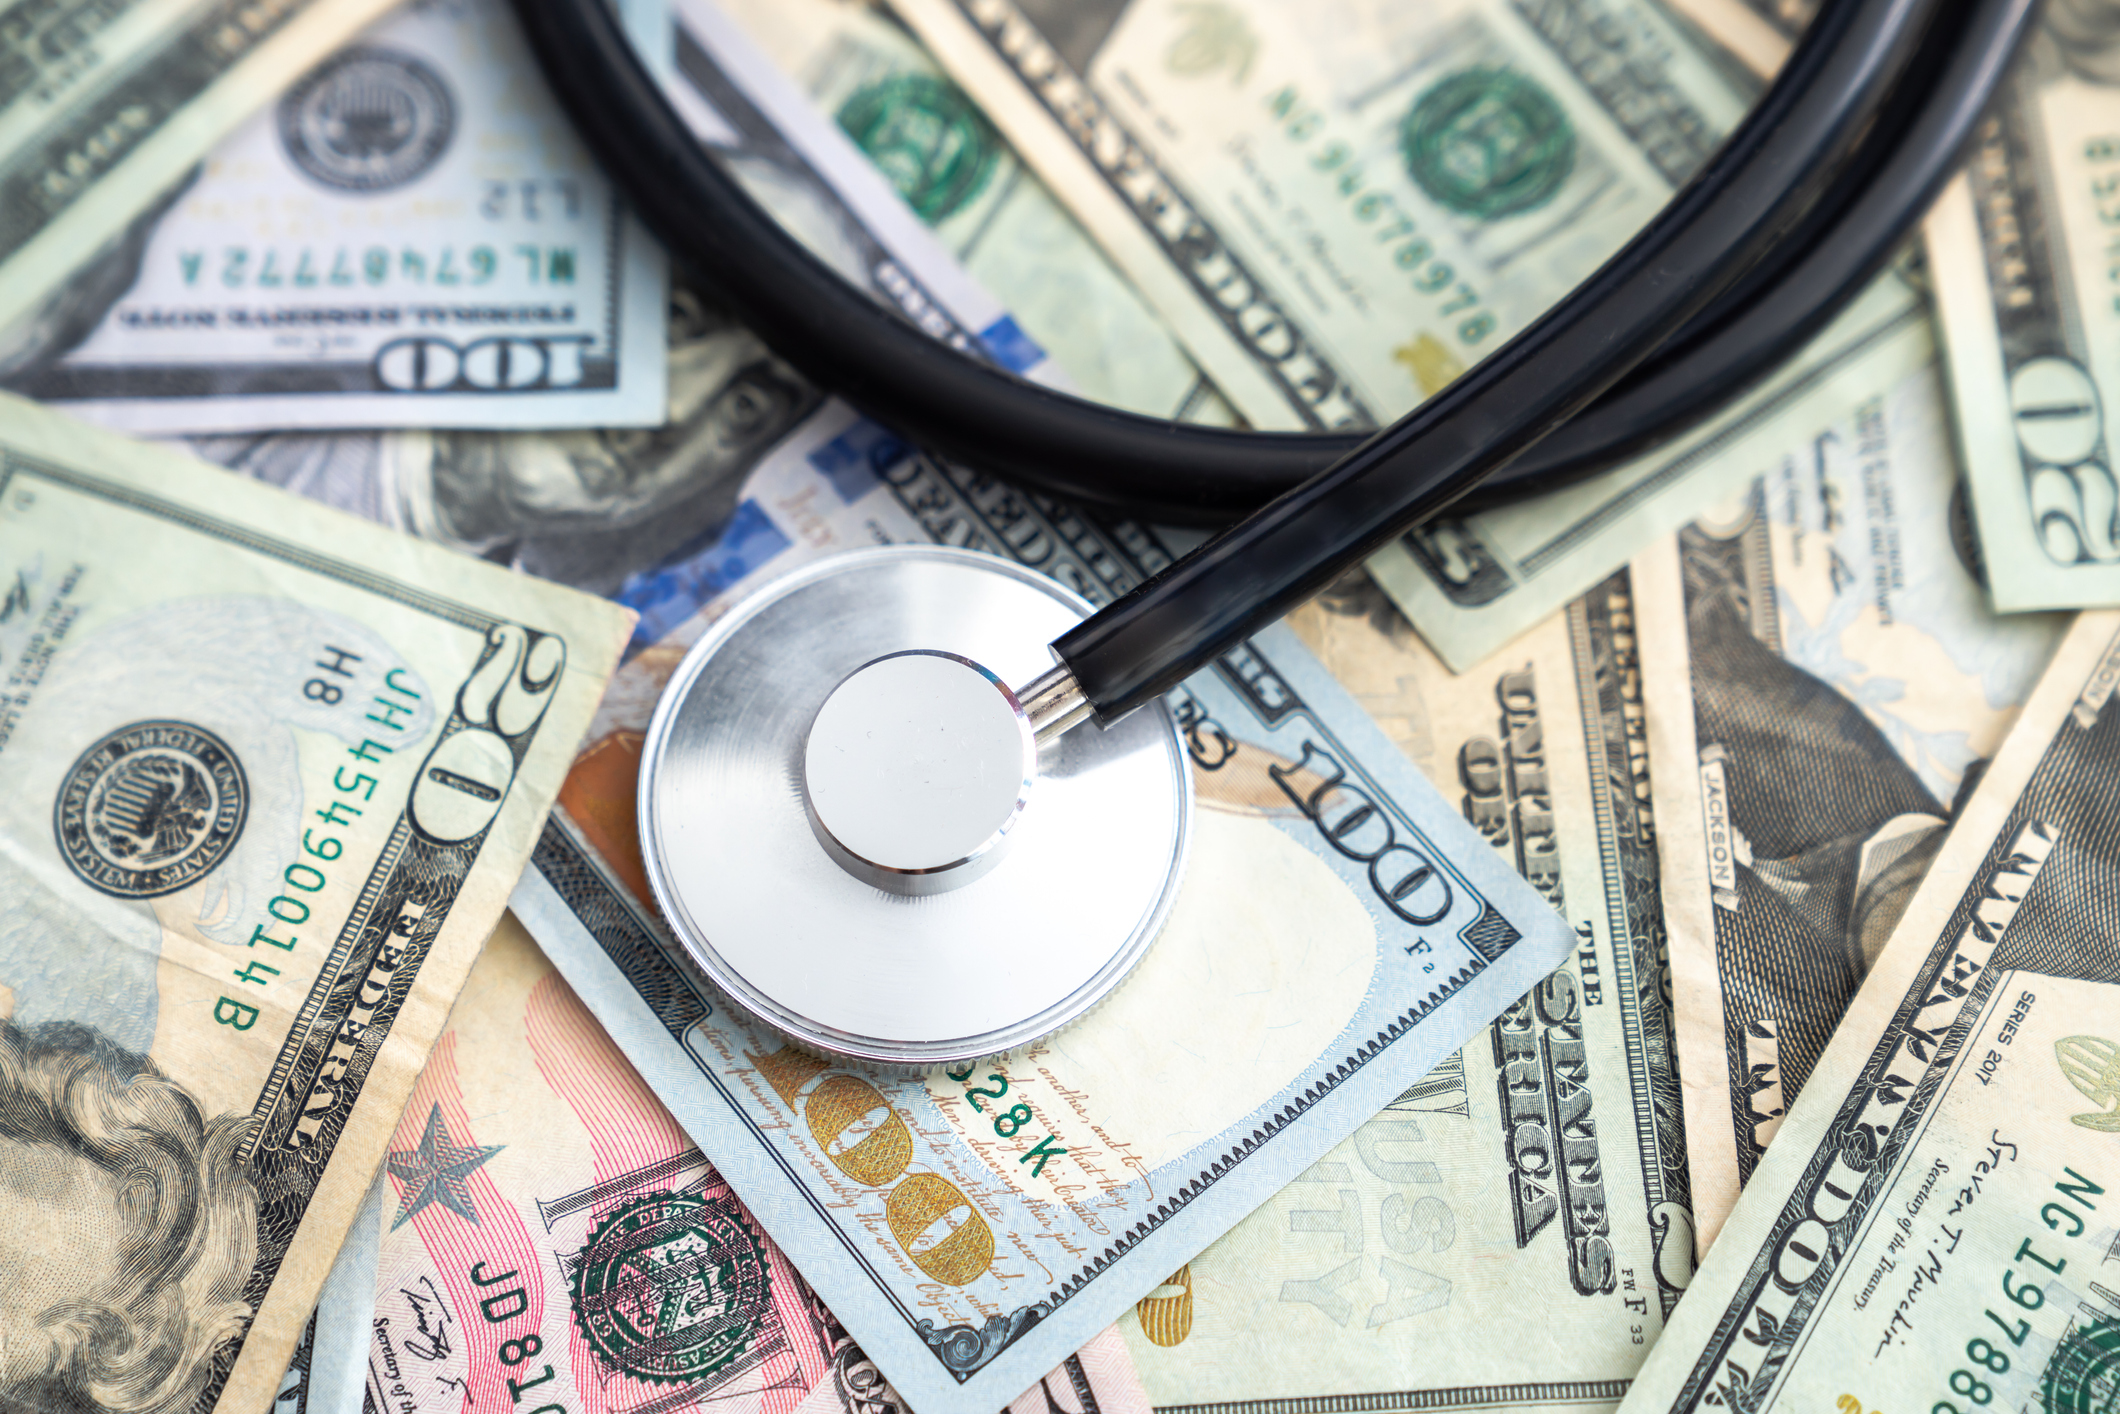 A stethoscope on a pile of money illustrates that rules around healthcare price transparency are meant to keep costs down